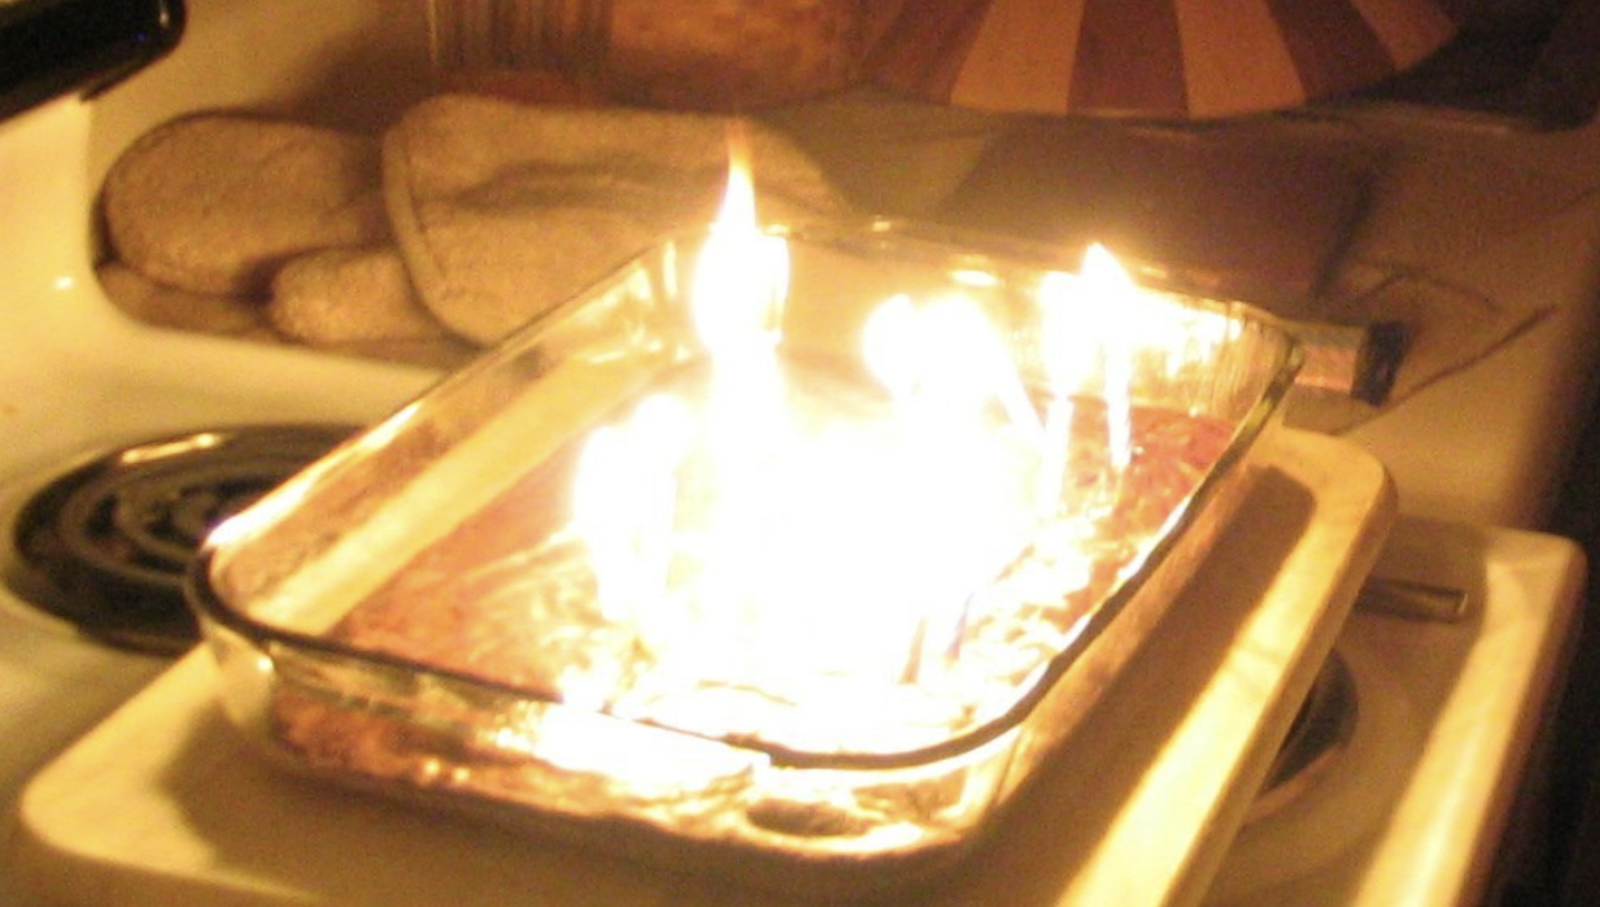 The photo is of a rectangular glass cake pan with contents that appear to be on fire with the fire being the only source of light illuminating the cake pan in yellow light, sitting on an old coil burner electric stove top next to a counter with oven mitts.